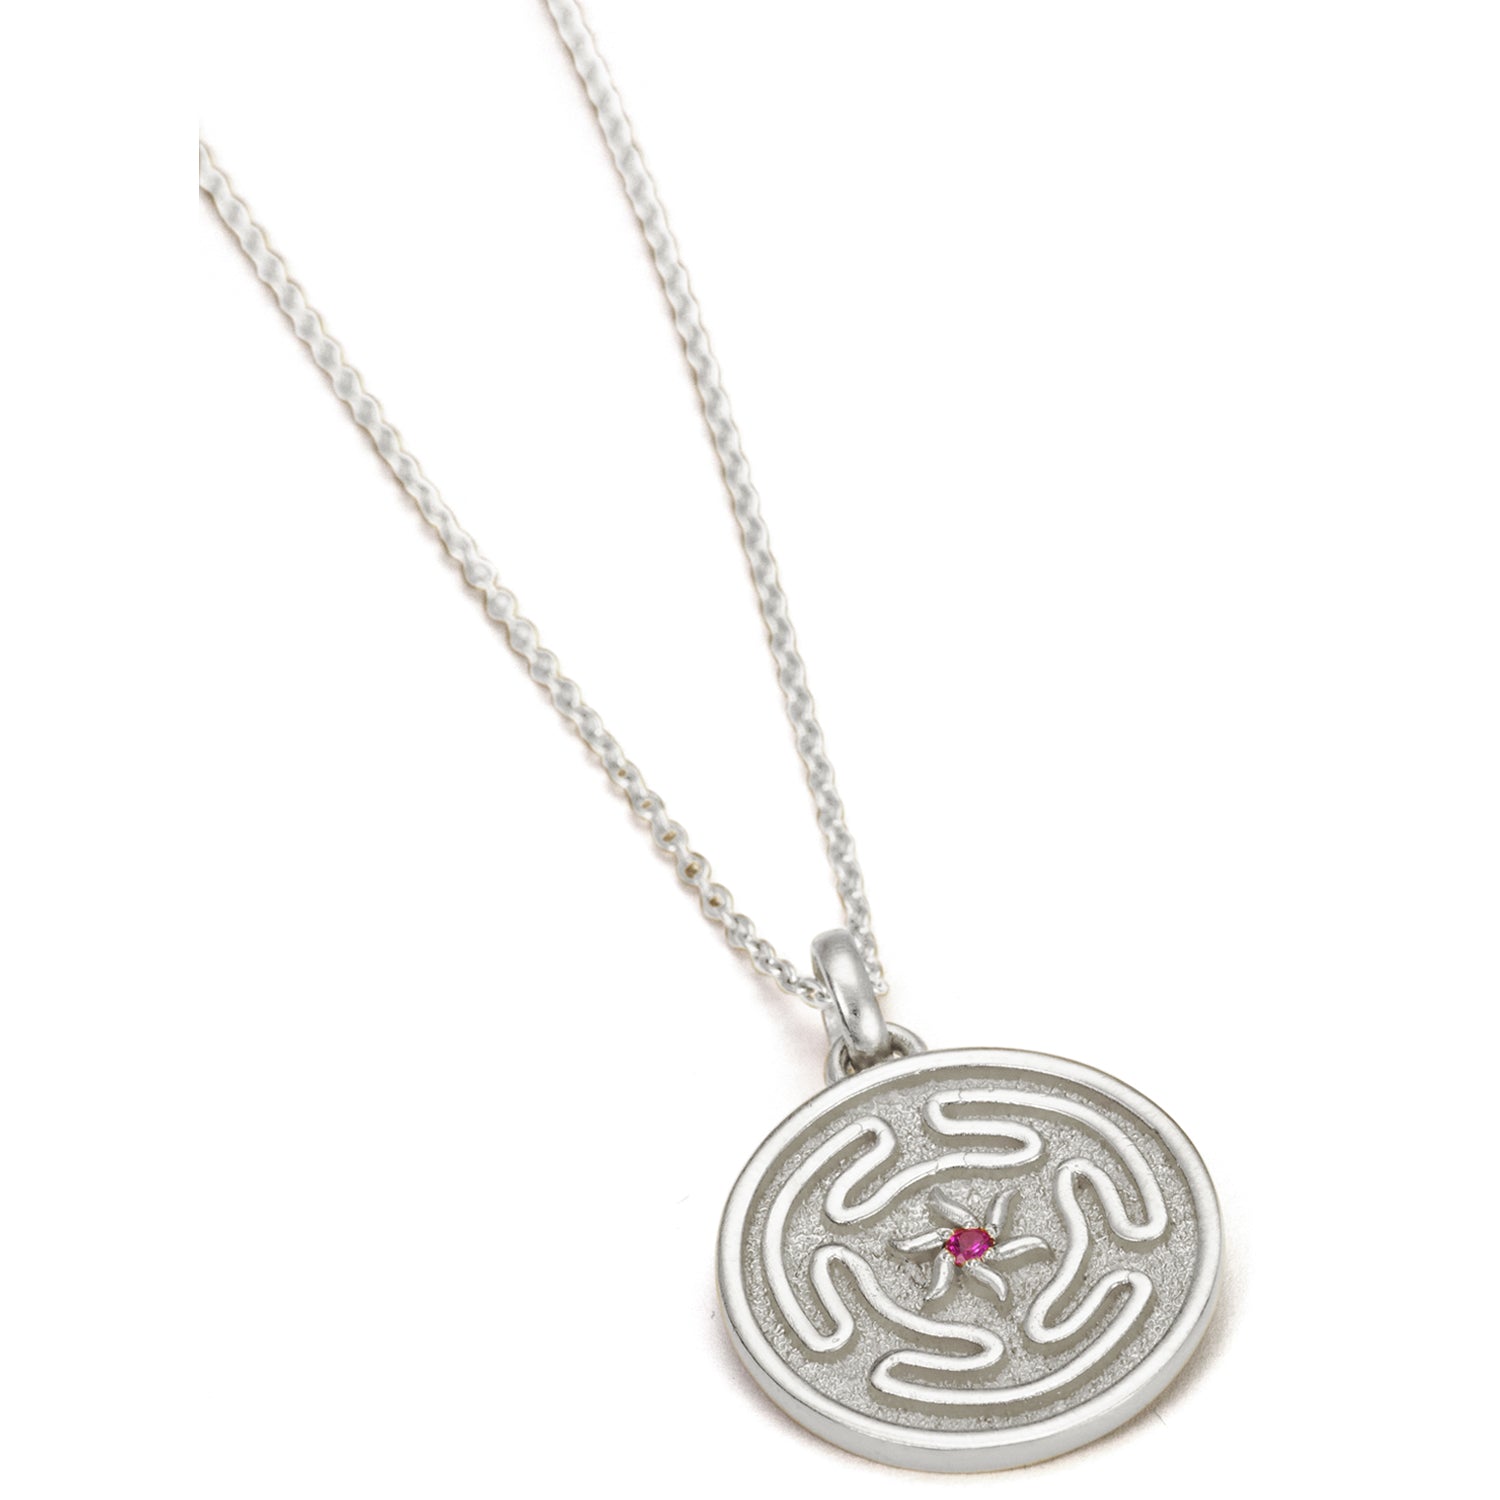 Hecate's wheel pendant with ruby made of high-quality sterling silver